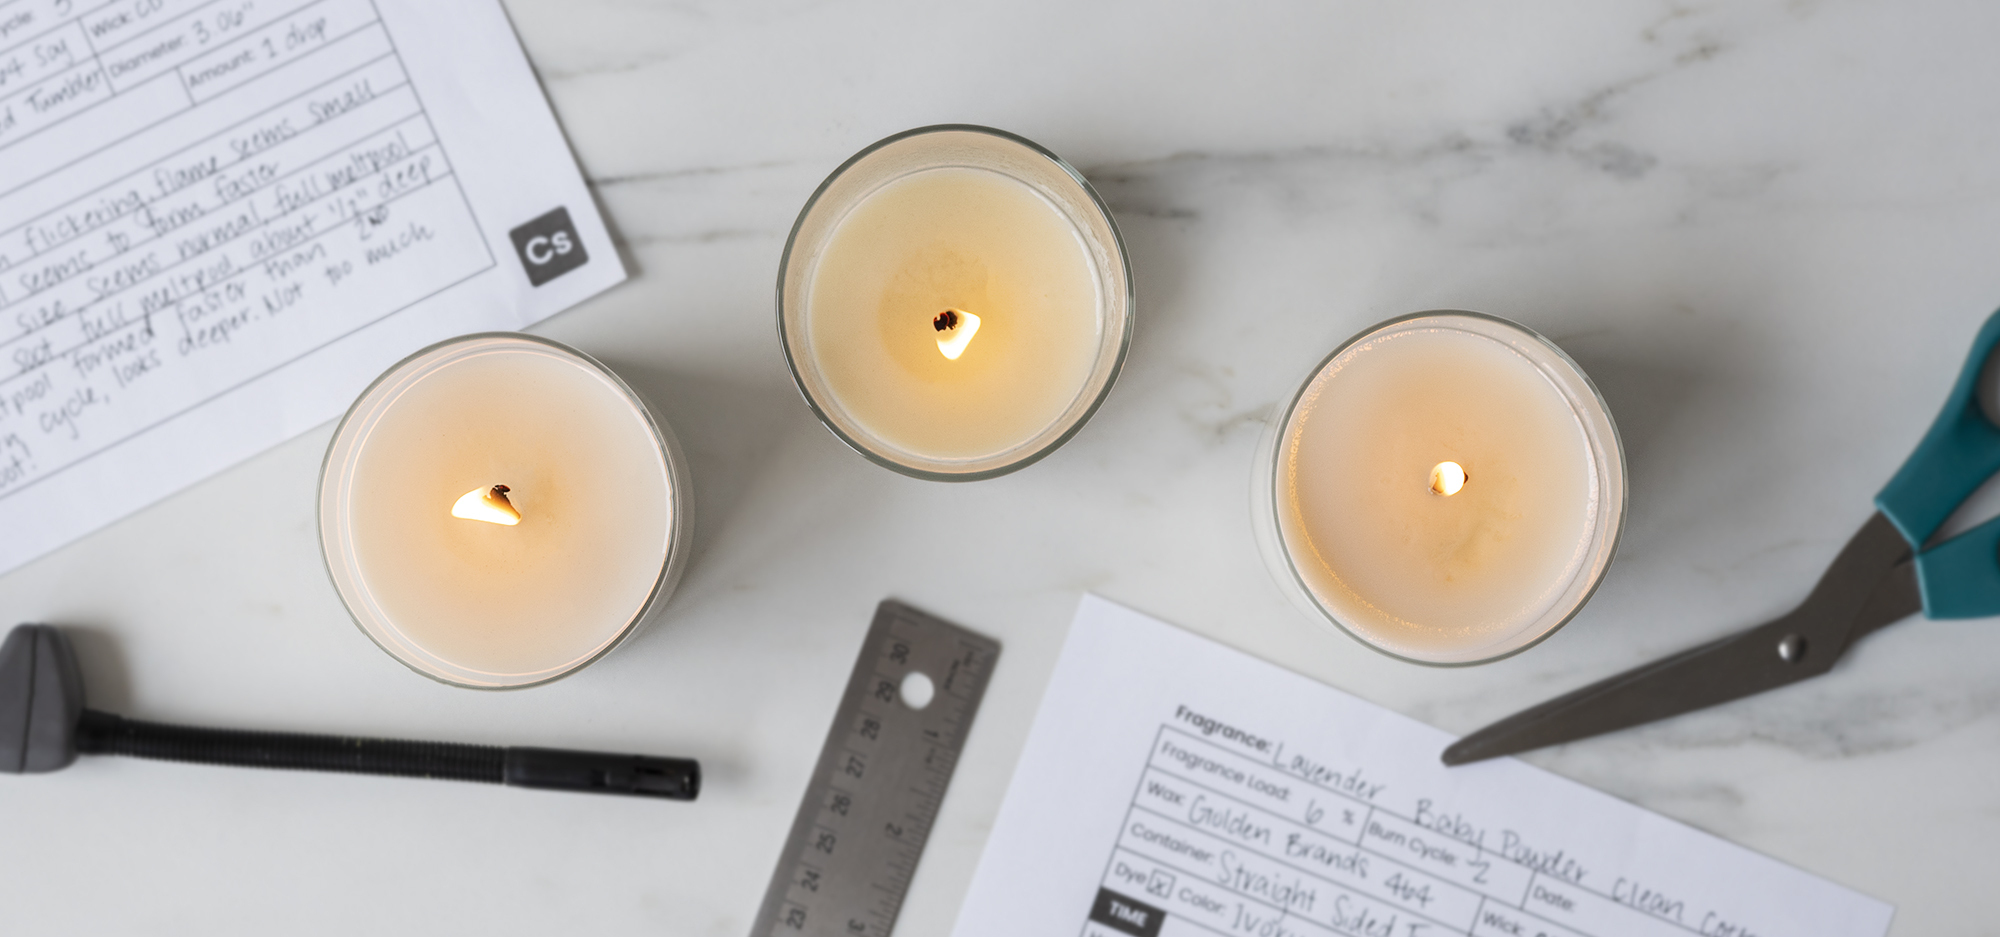 LX Pretabbed Candle Wick - CandleScience